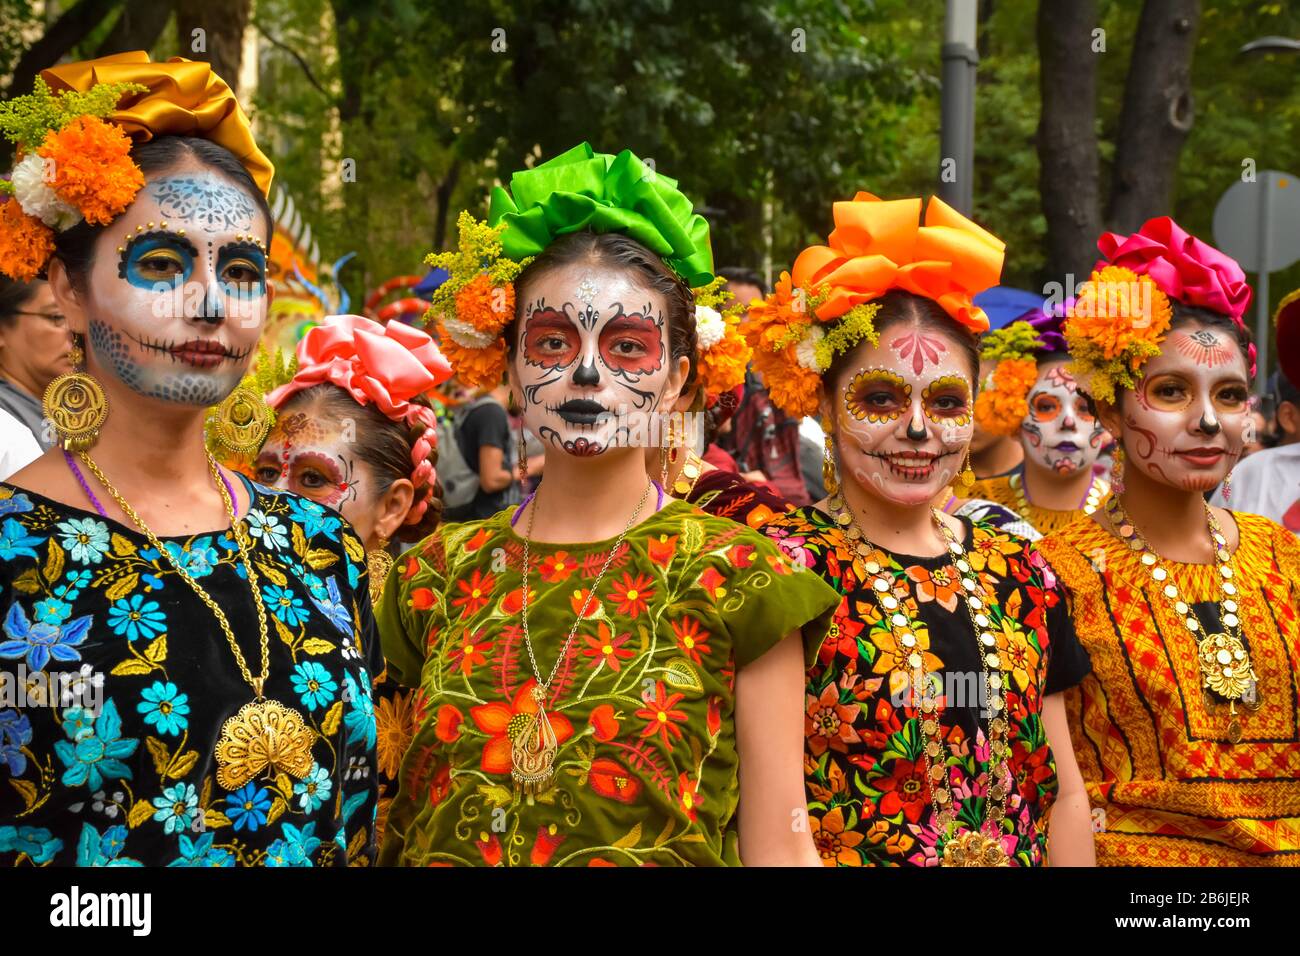 Mexico City, Mexico, ; October 26 2019: Young Girls dressed as catrinas in typical costumes at the Day of the Dead celebration in Mexico Stock Photo